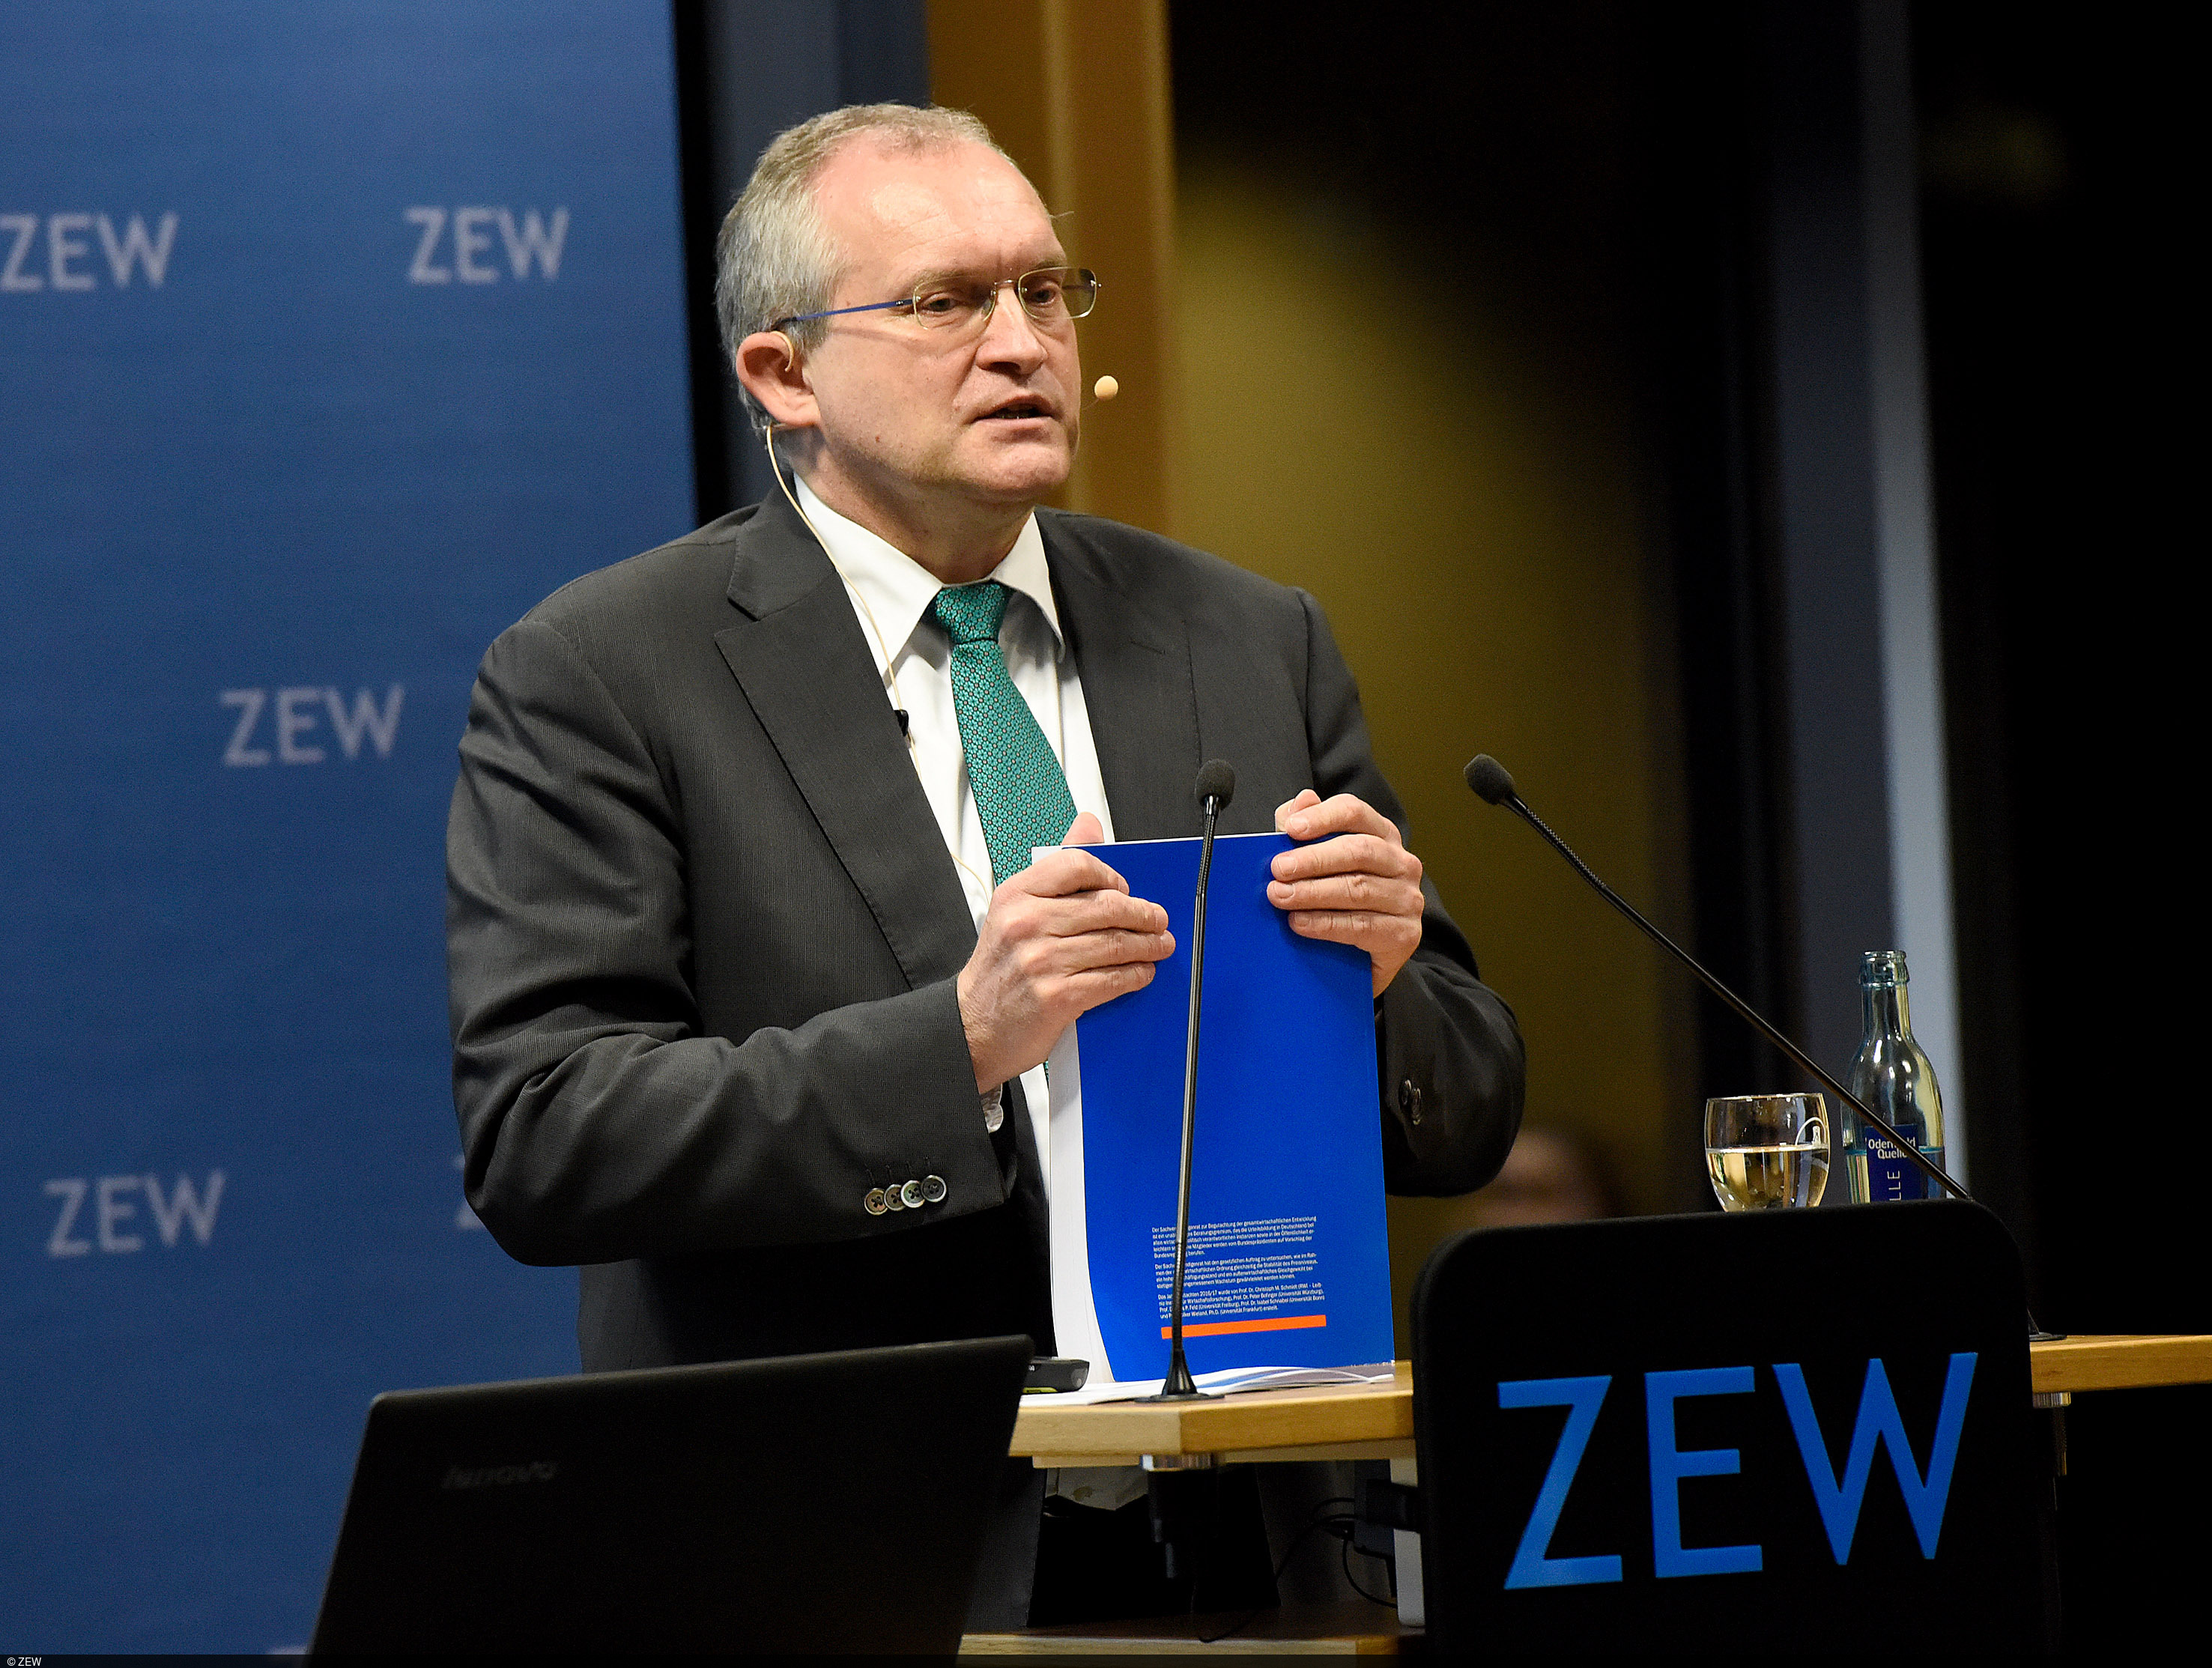 Christoph Schmidt presents the annual report 2016/17 of the Council of Economic Experts at ZEW